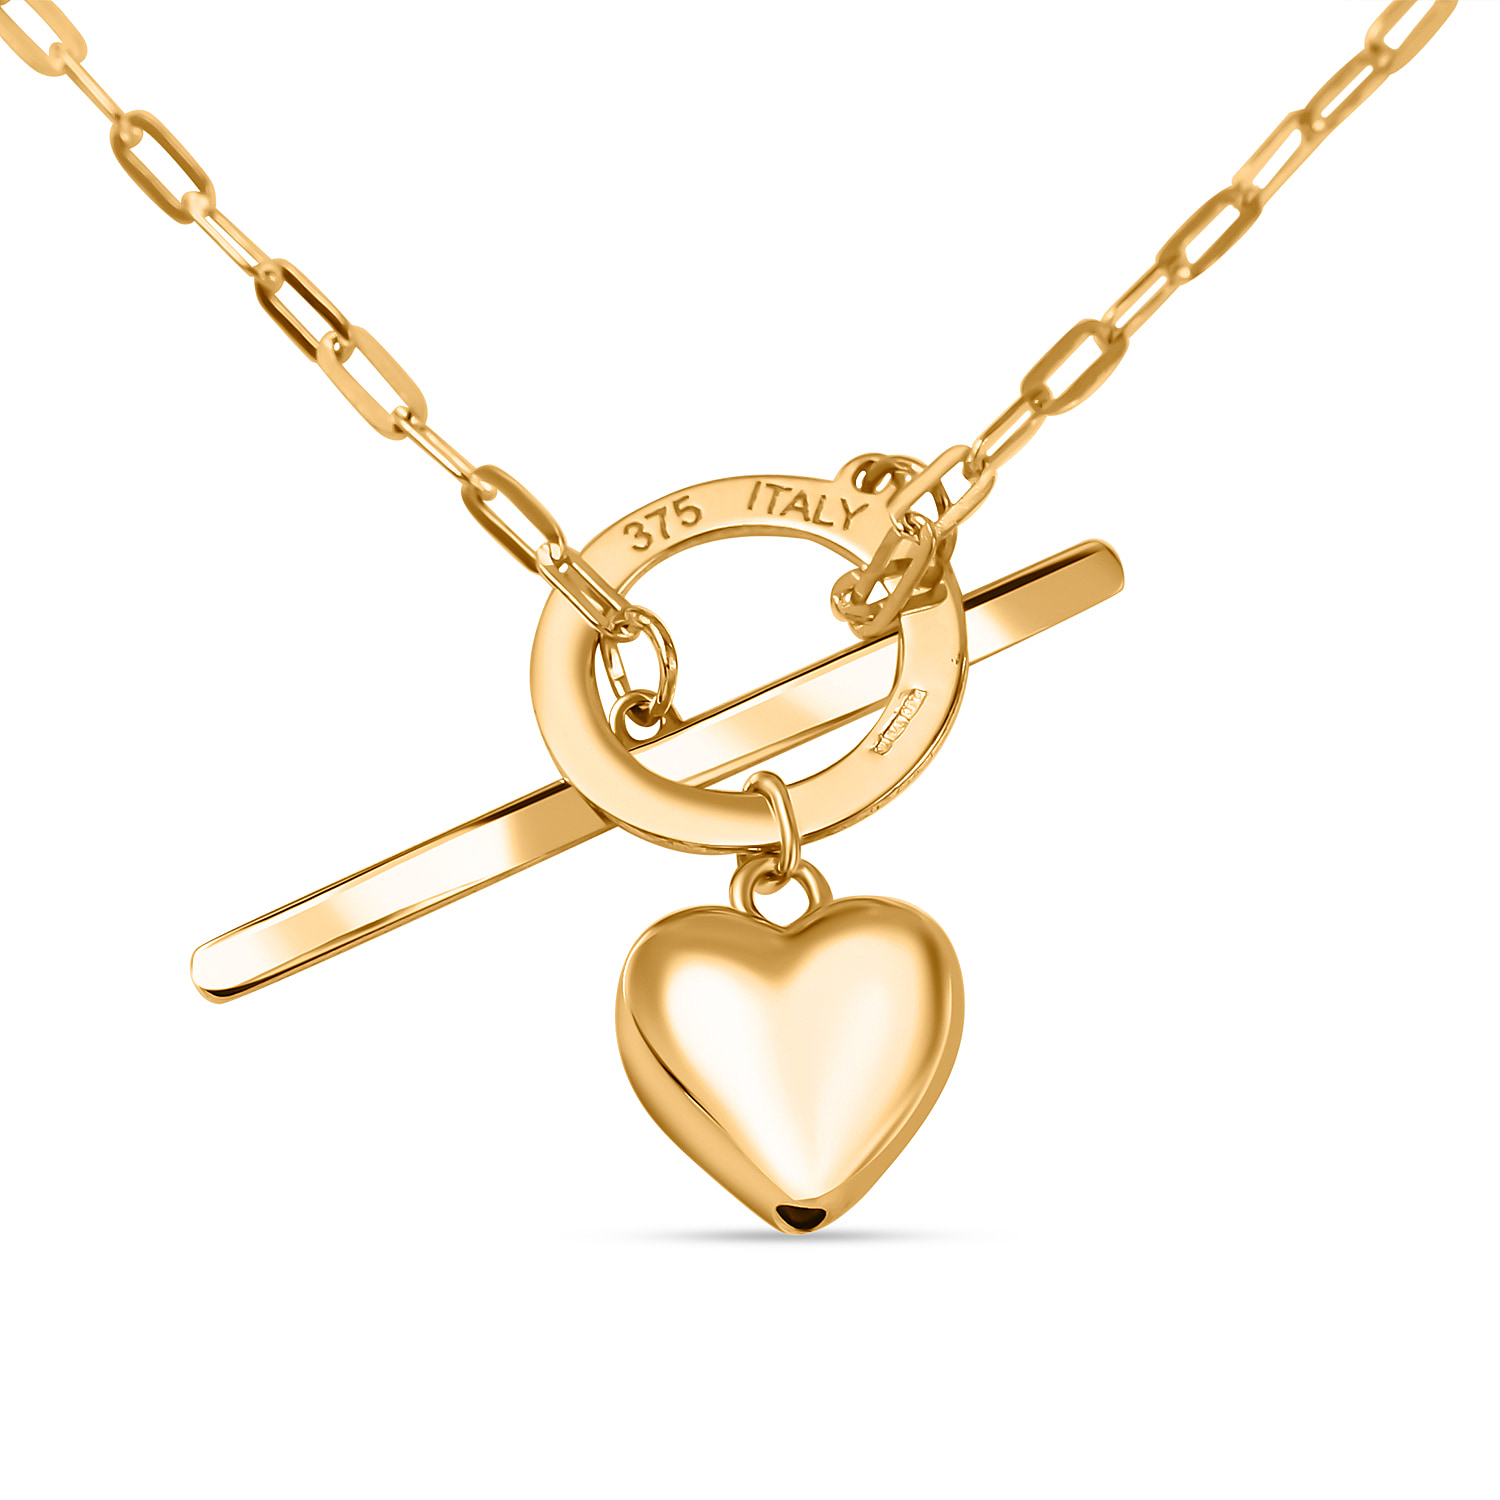 Maestro Collection 9K Yellow Gold Heart Pendant T-Bar Necklace (Size - 20)